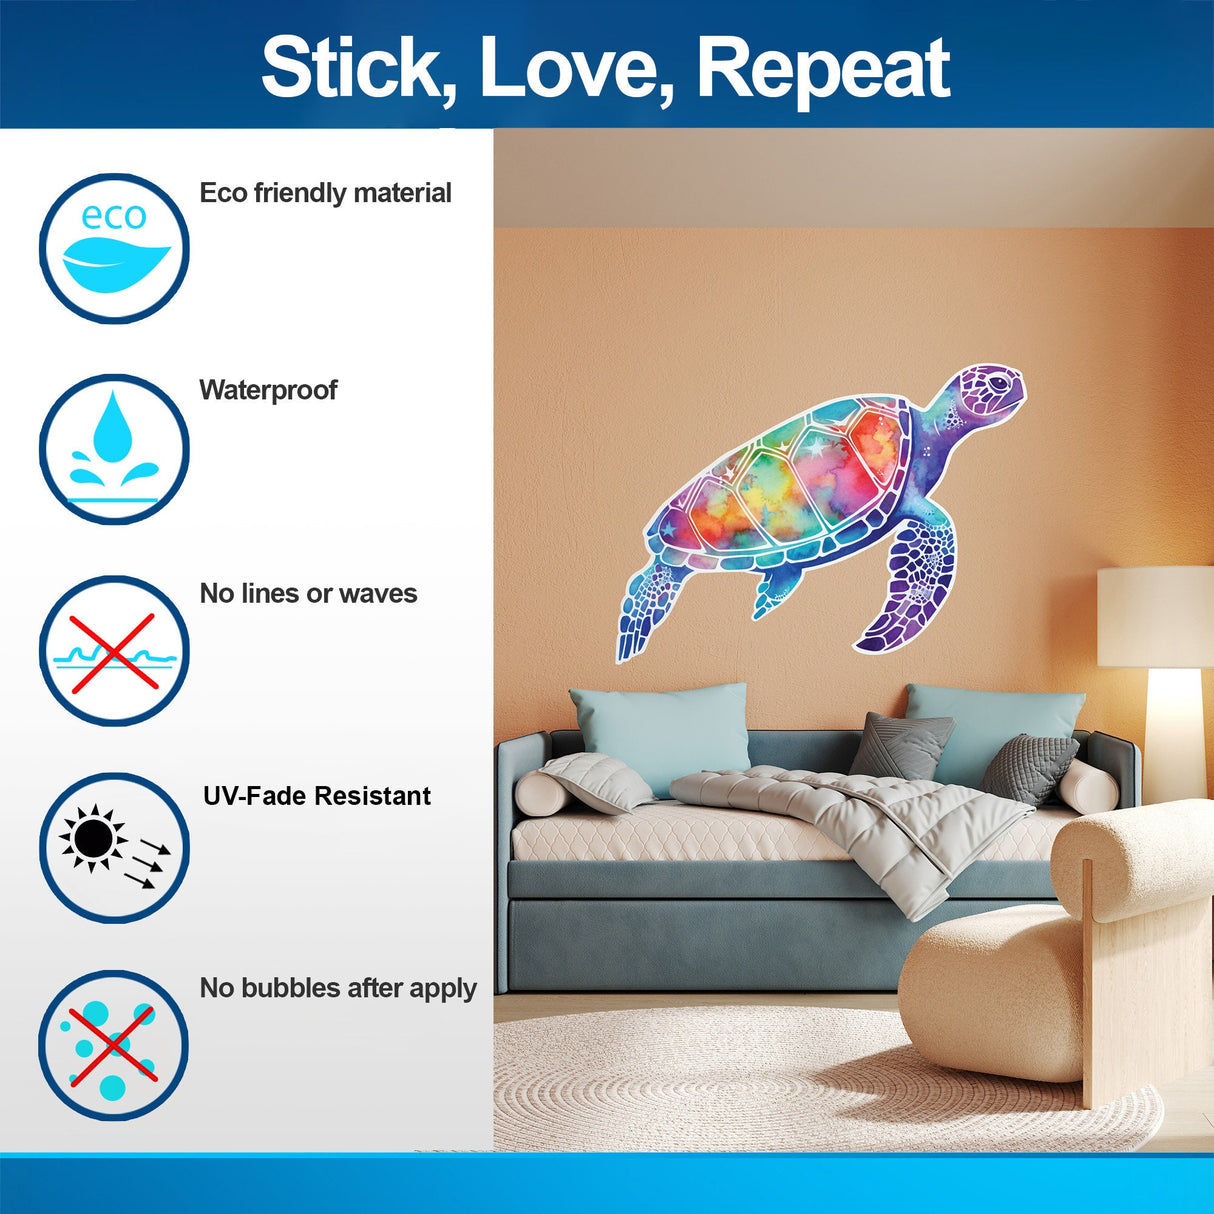 Radiant Sea Turtle Wall Decal - Vivid Ocean-Inspired Sticker - Perfect for Nautical Room Themes - Marine Life Art Mural